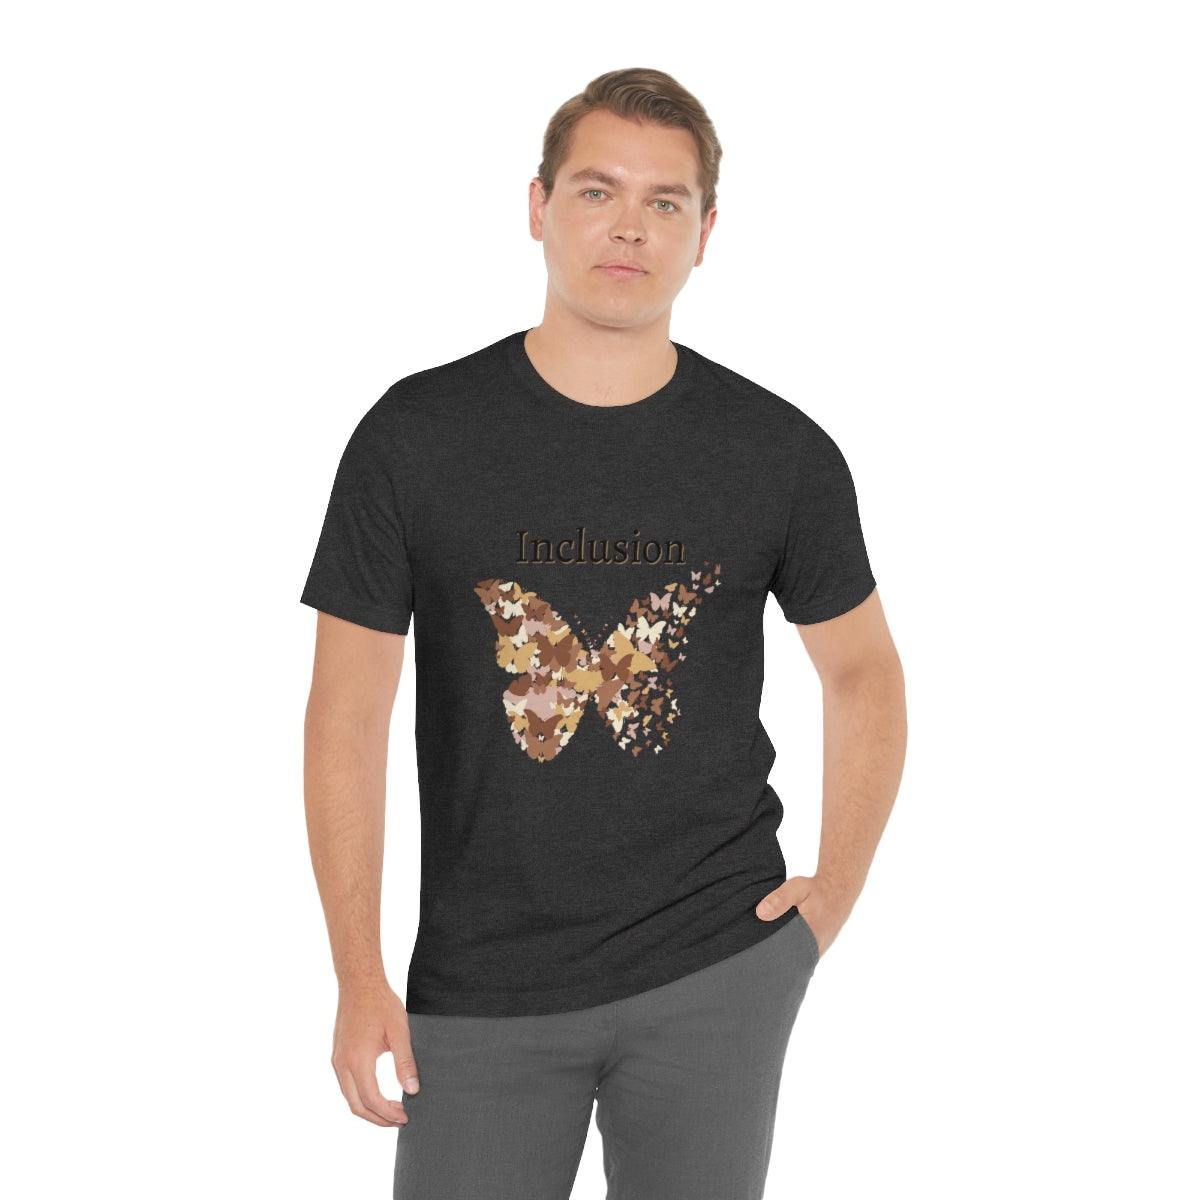 Inclusion Shirt Shades Butterflies, Diversity Inclusion Tshirts, DEIB Statement Tees, Inclusion is an Act Tees